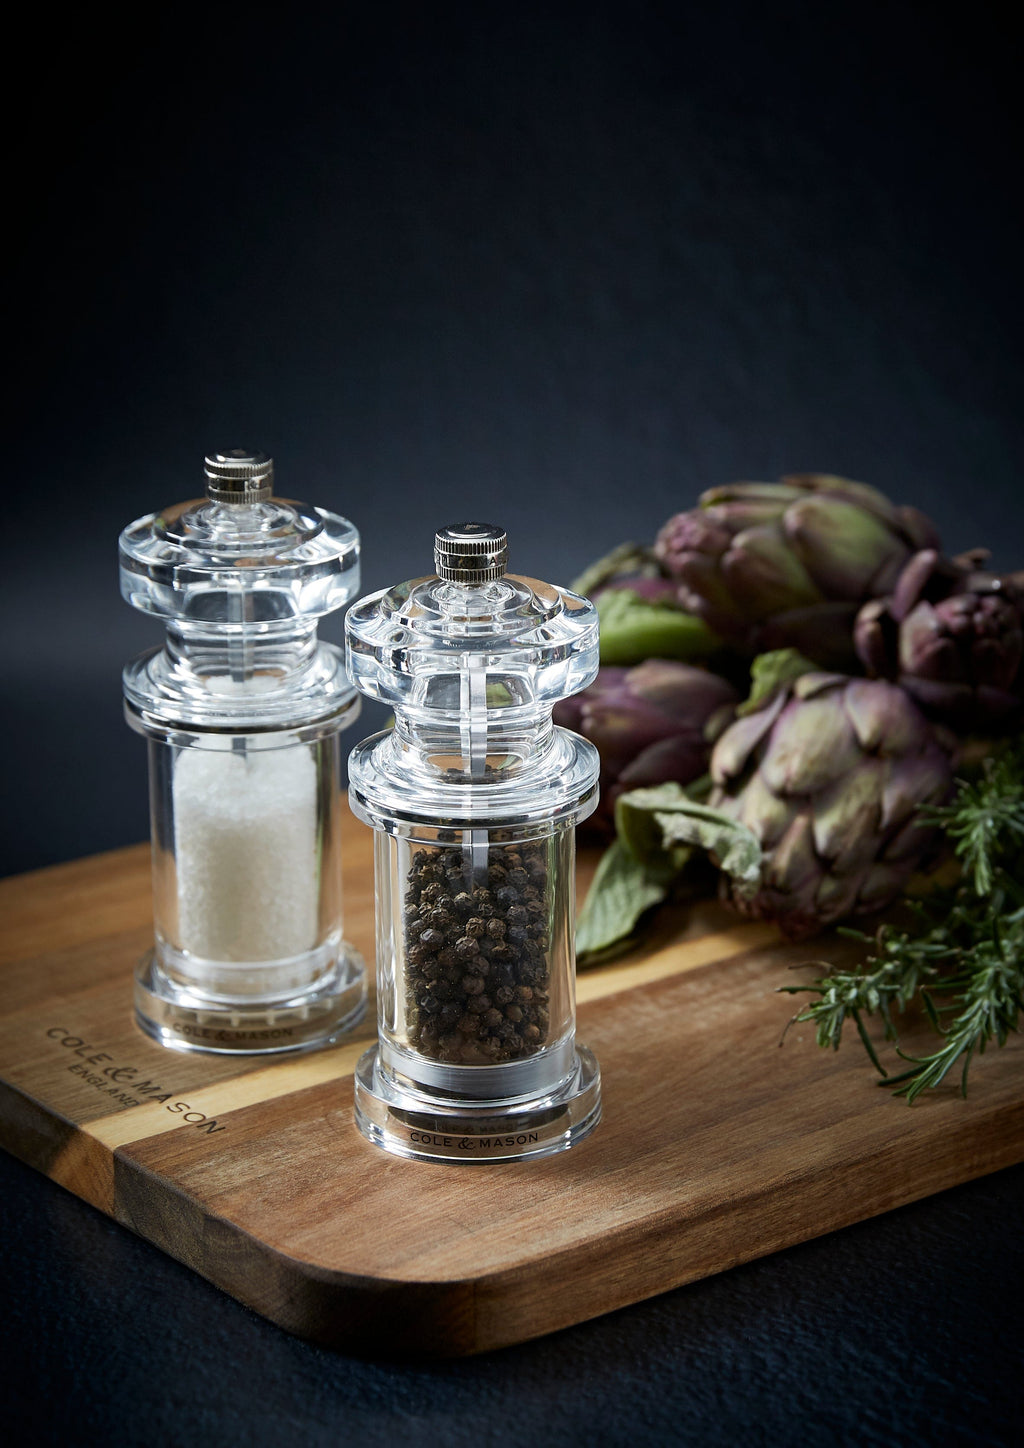 Cole and Mason Salt and Pepper Grinder Set Clear Acrylic 5"